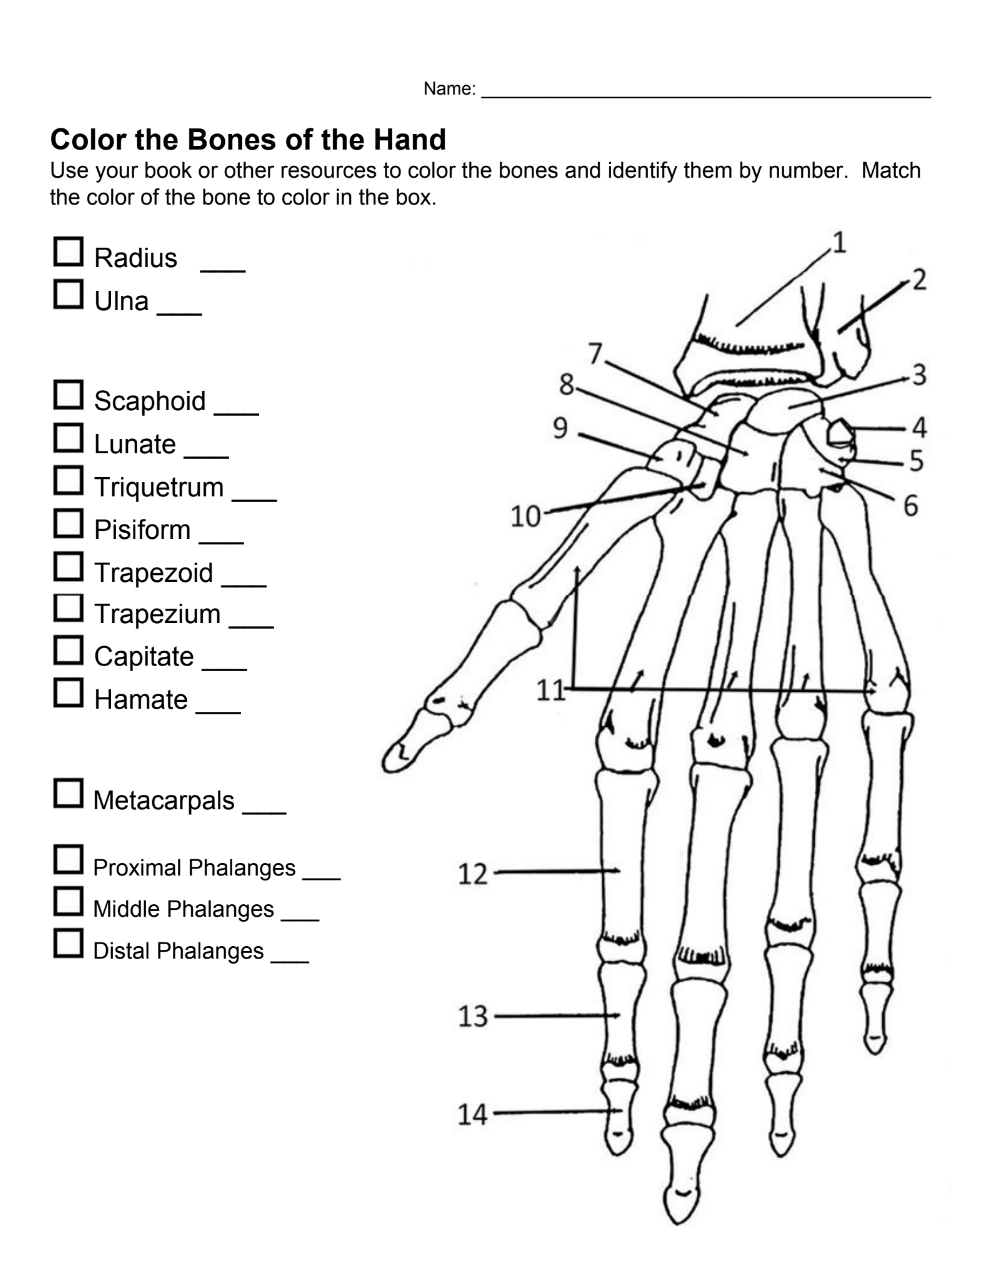 Color the Bones of the Hand.png